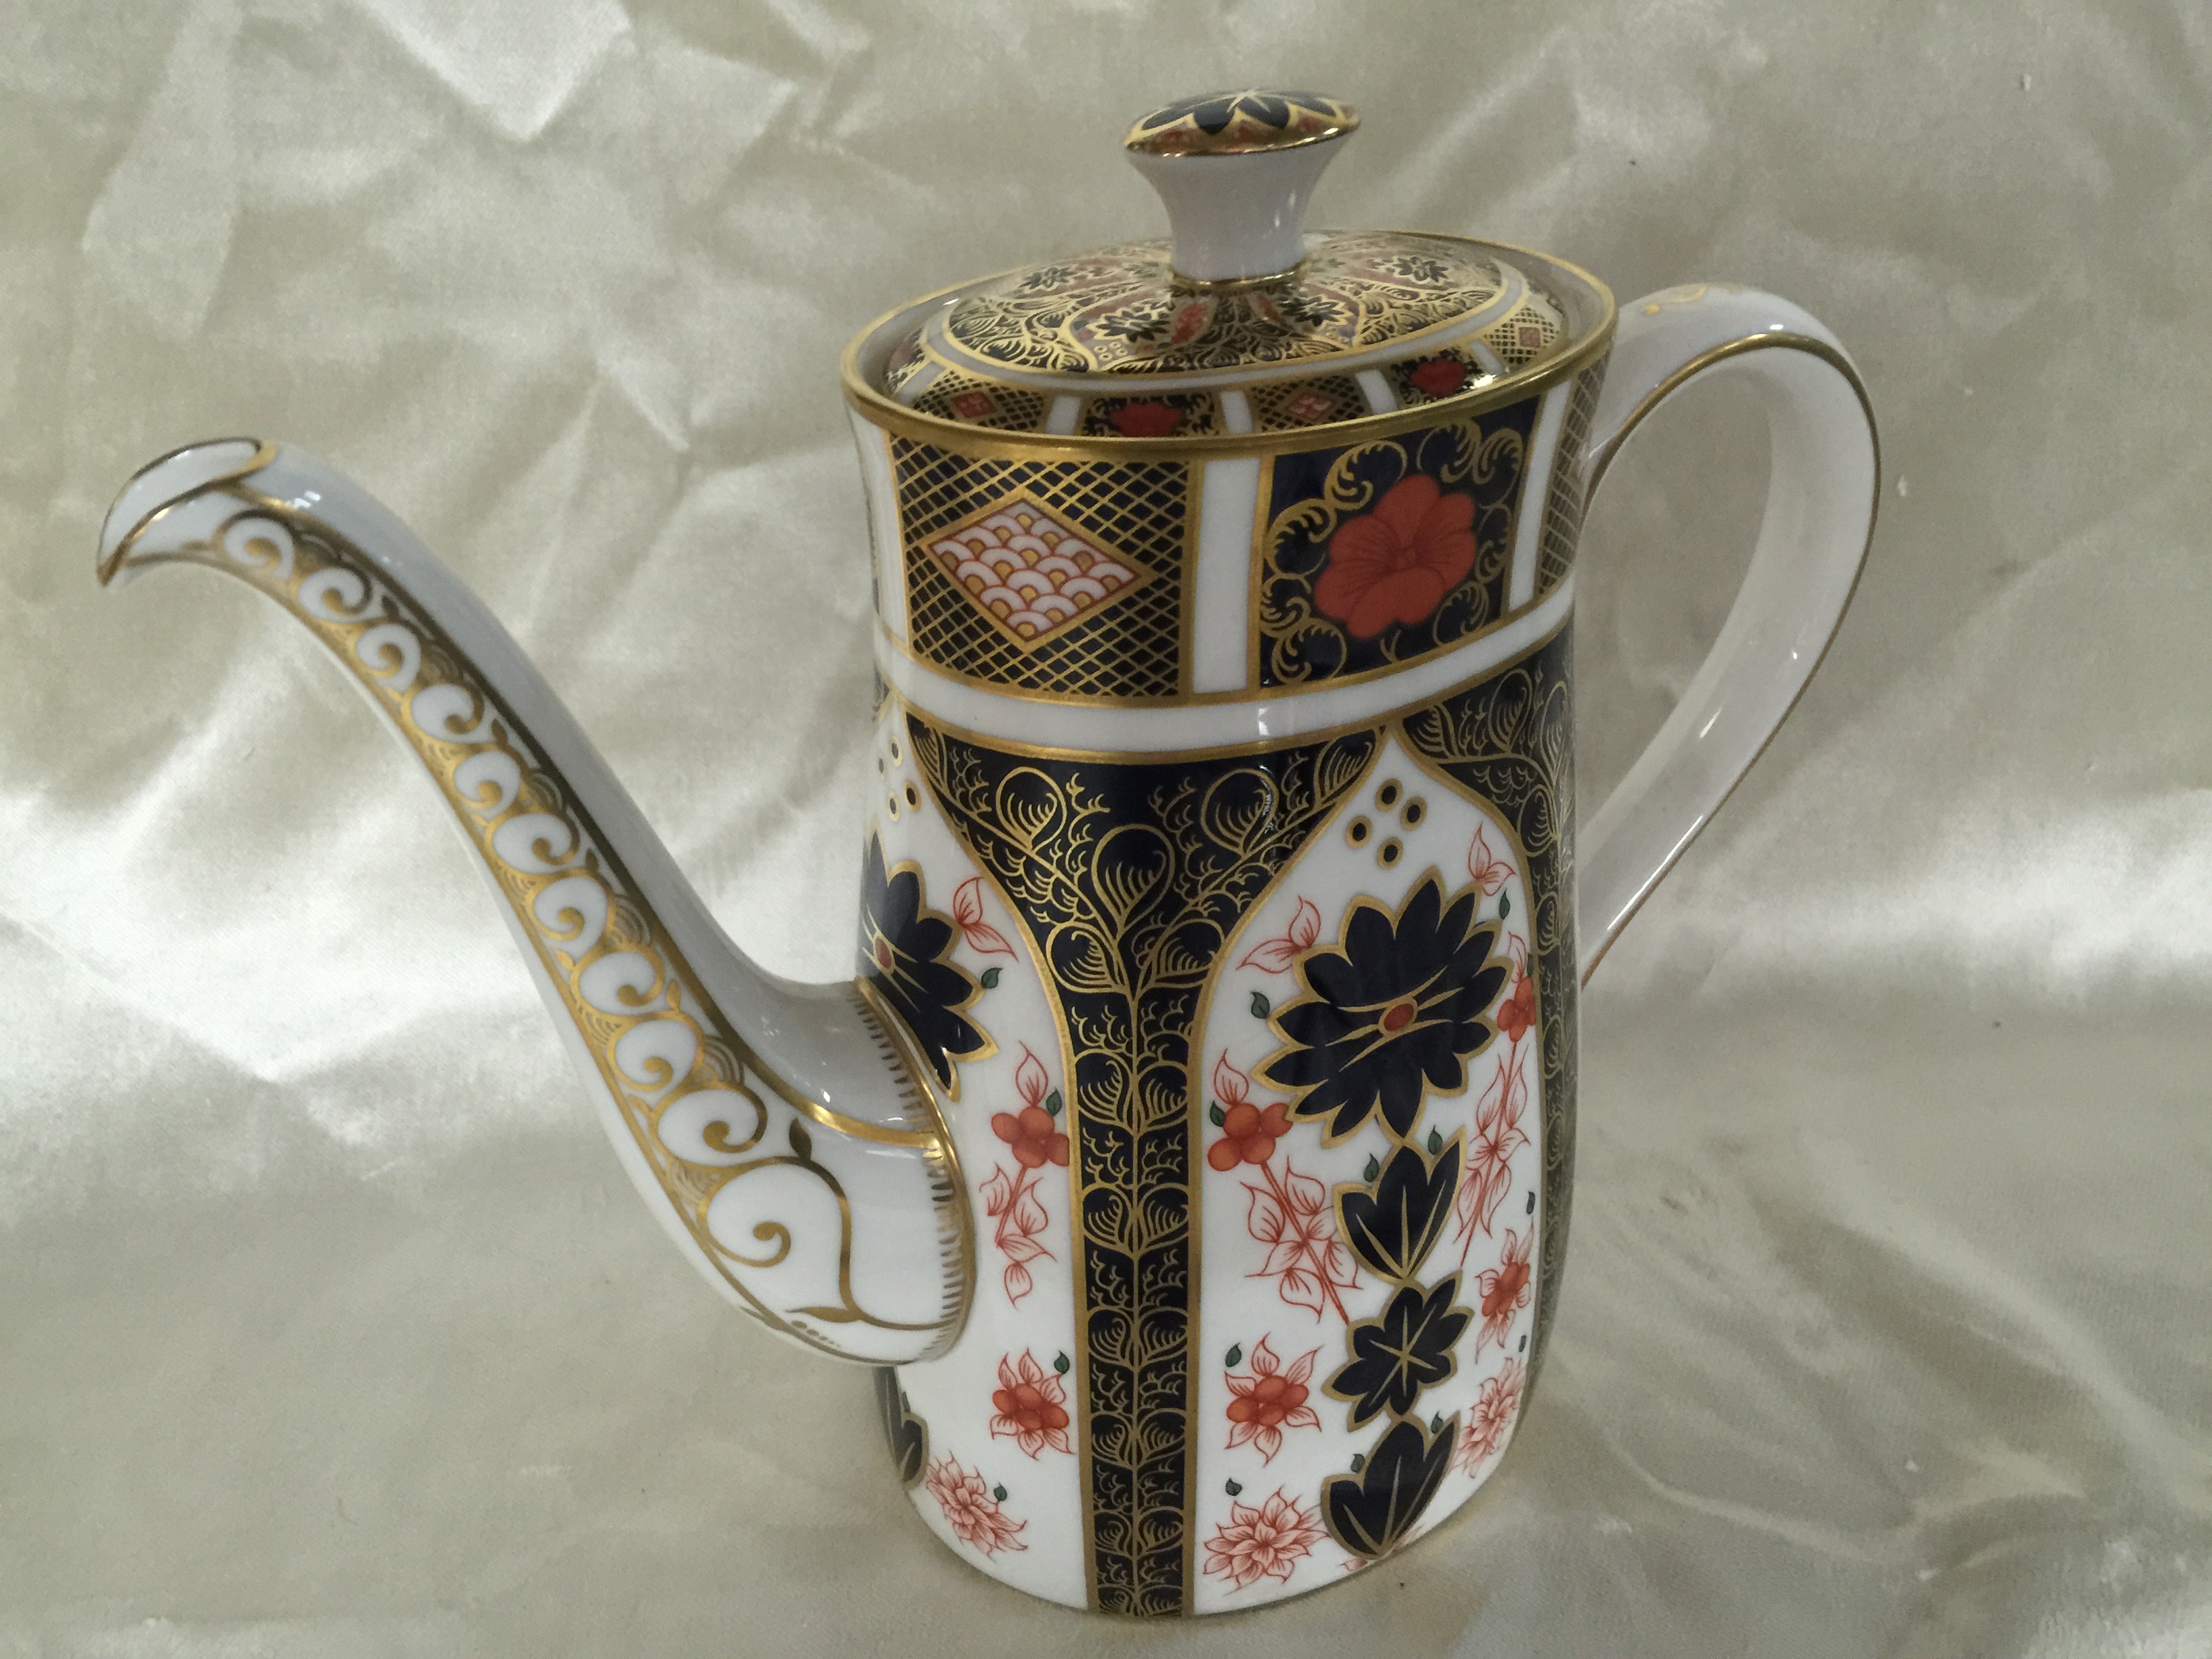 LARGE ROYAL CROWN DERBY COFFEE POT - Image 2 of 2